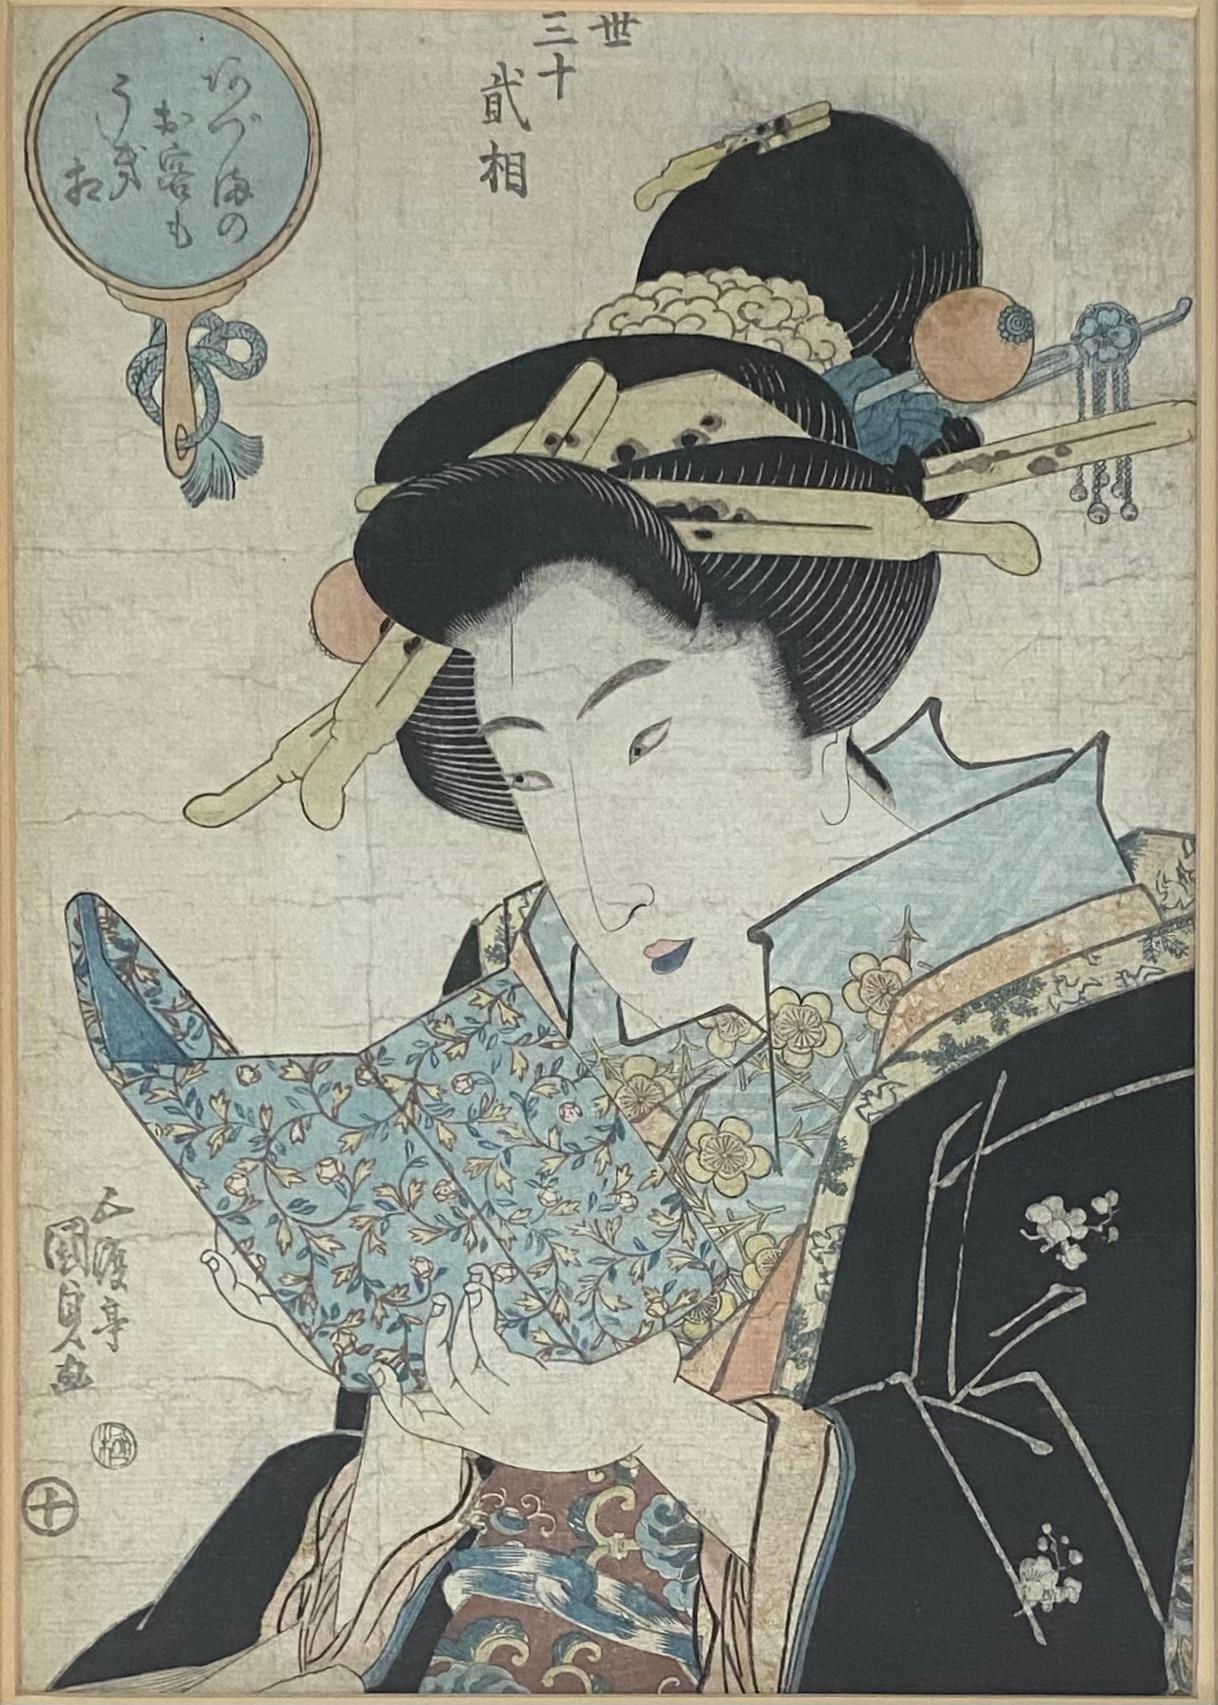 Paper Pair of 19th Century Antique Japanese Woodblocks Prints Attrib. to Keisai Eisen For Sale